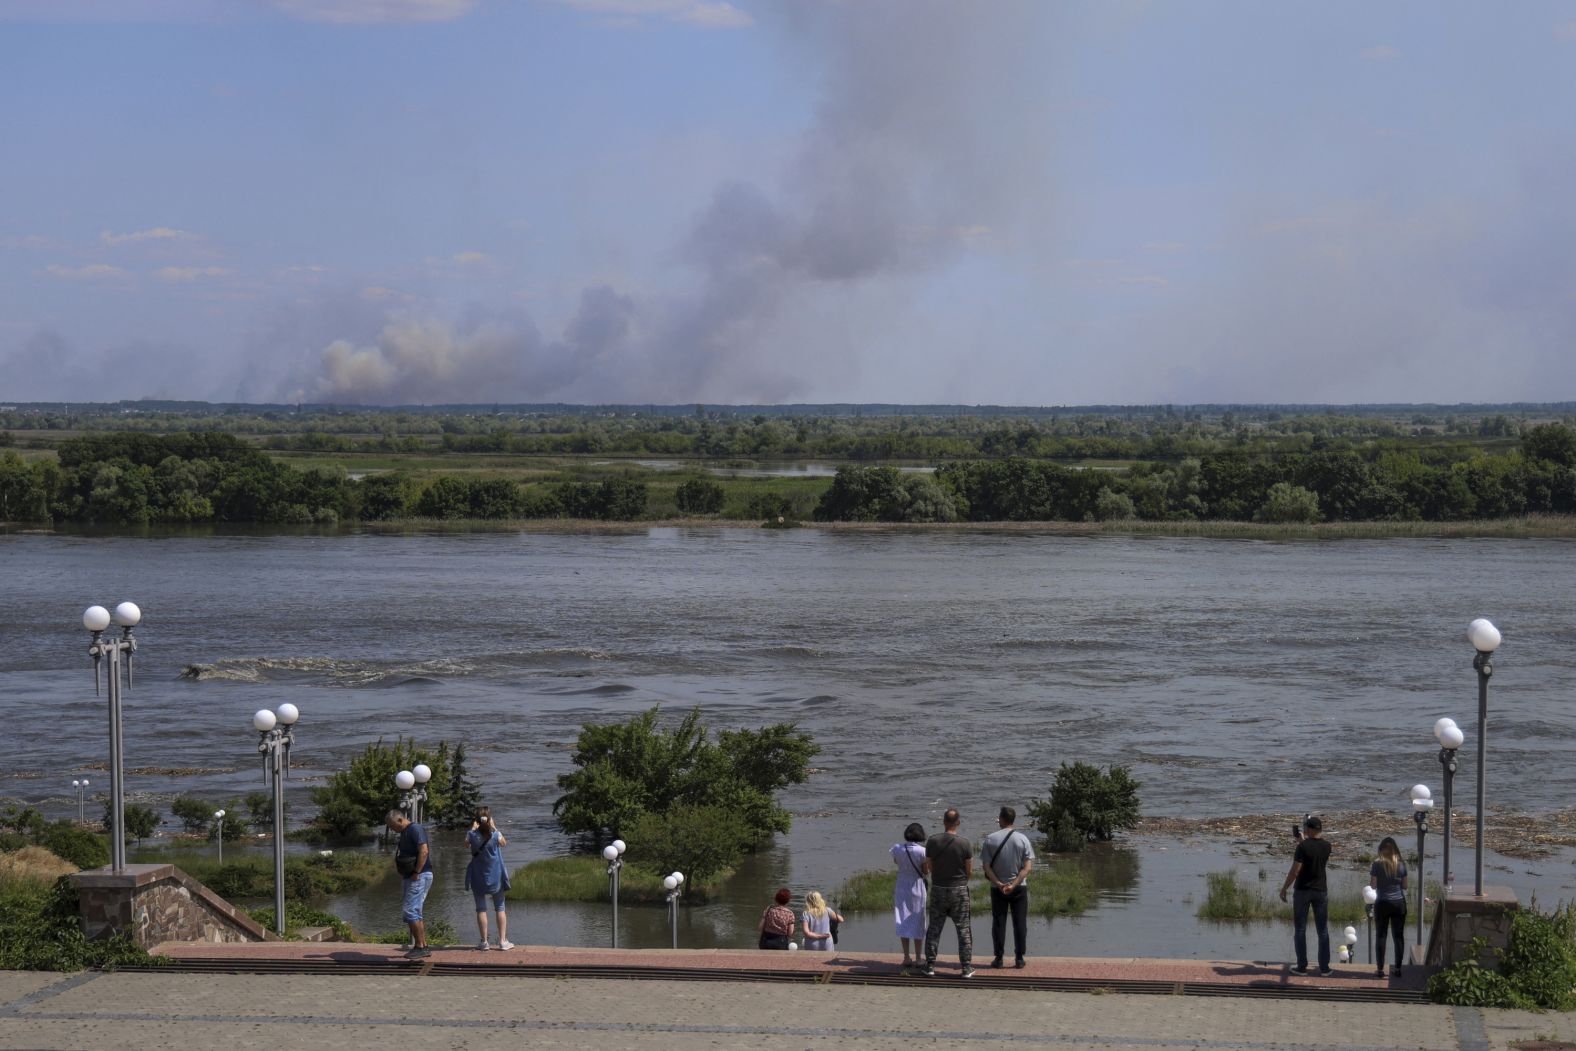 Local residents stand on an embankment of the flooded Dnipro River as smoke rises from shelling on the opposite bank.